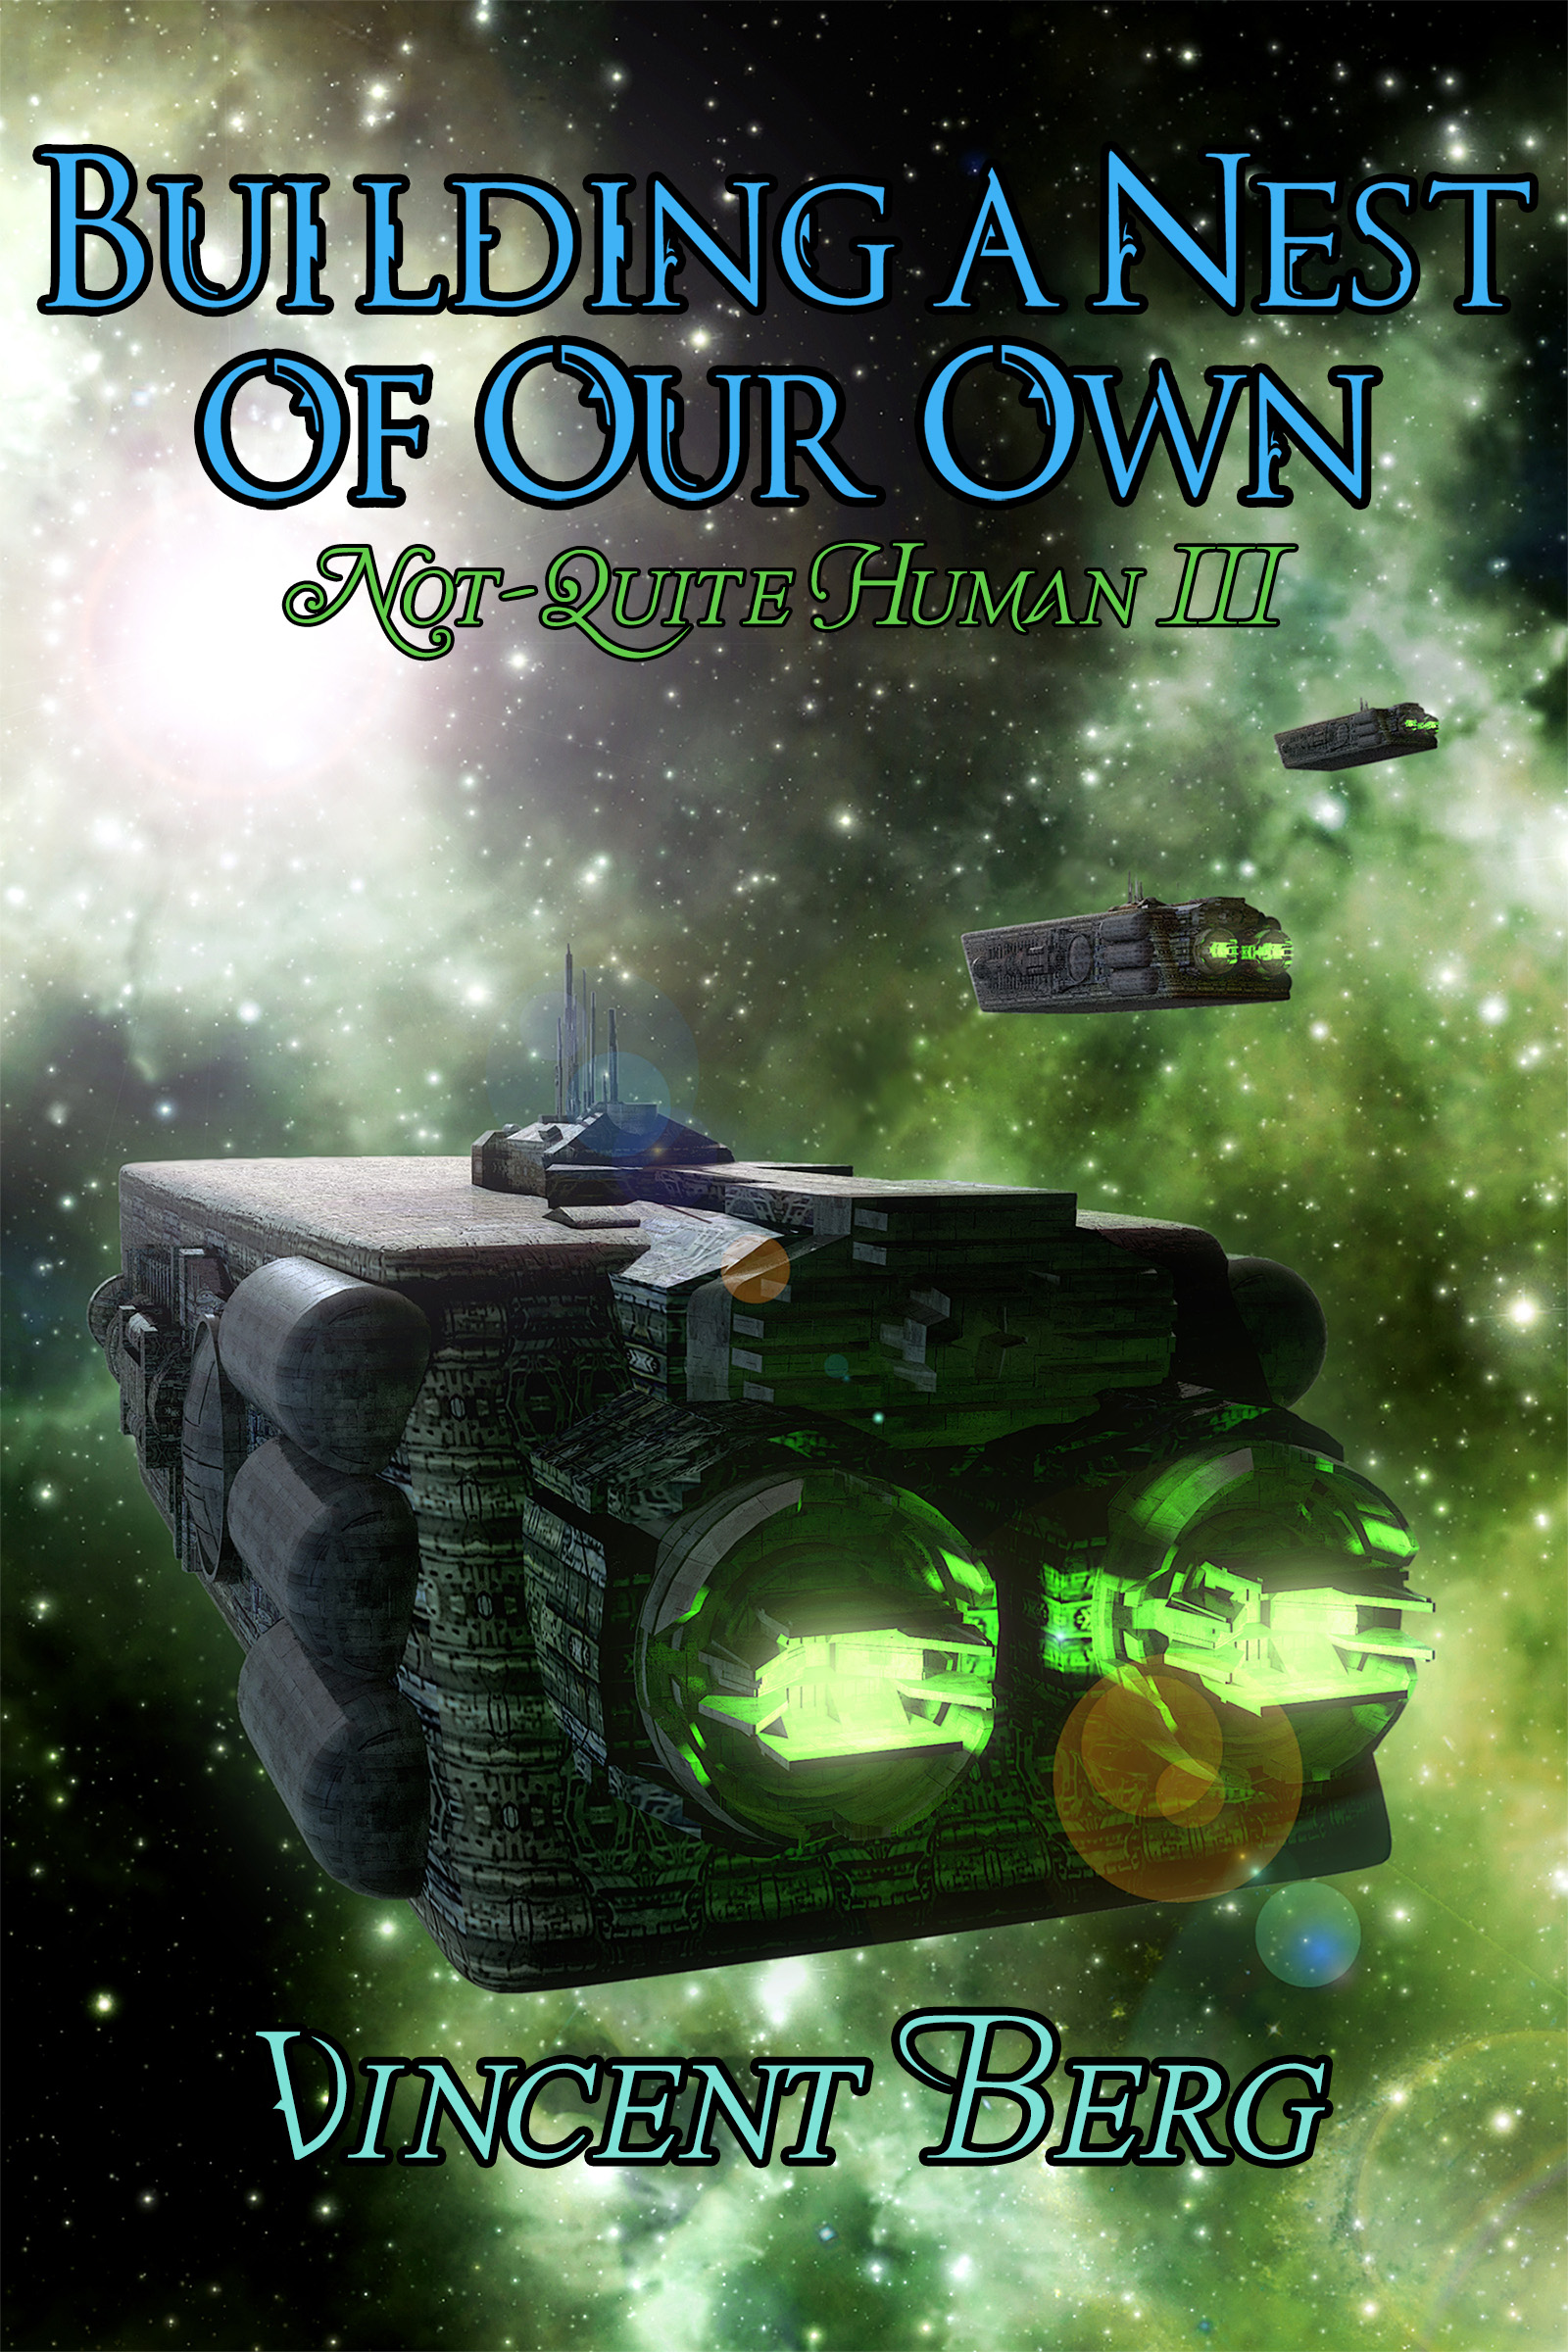 Cover of 'Building a Nest of Our Own' showing three small spacecraft approaching a distant world set against a dark blue-green background of an espansive galaxy.